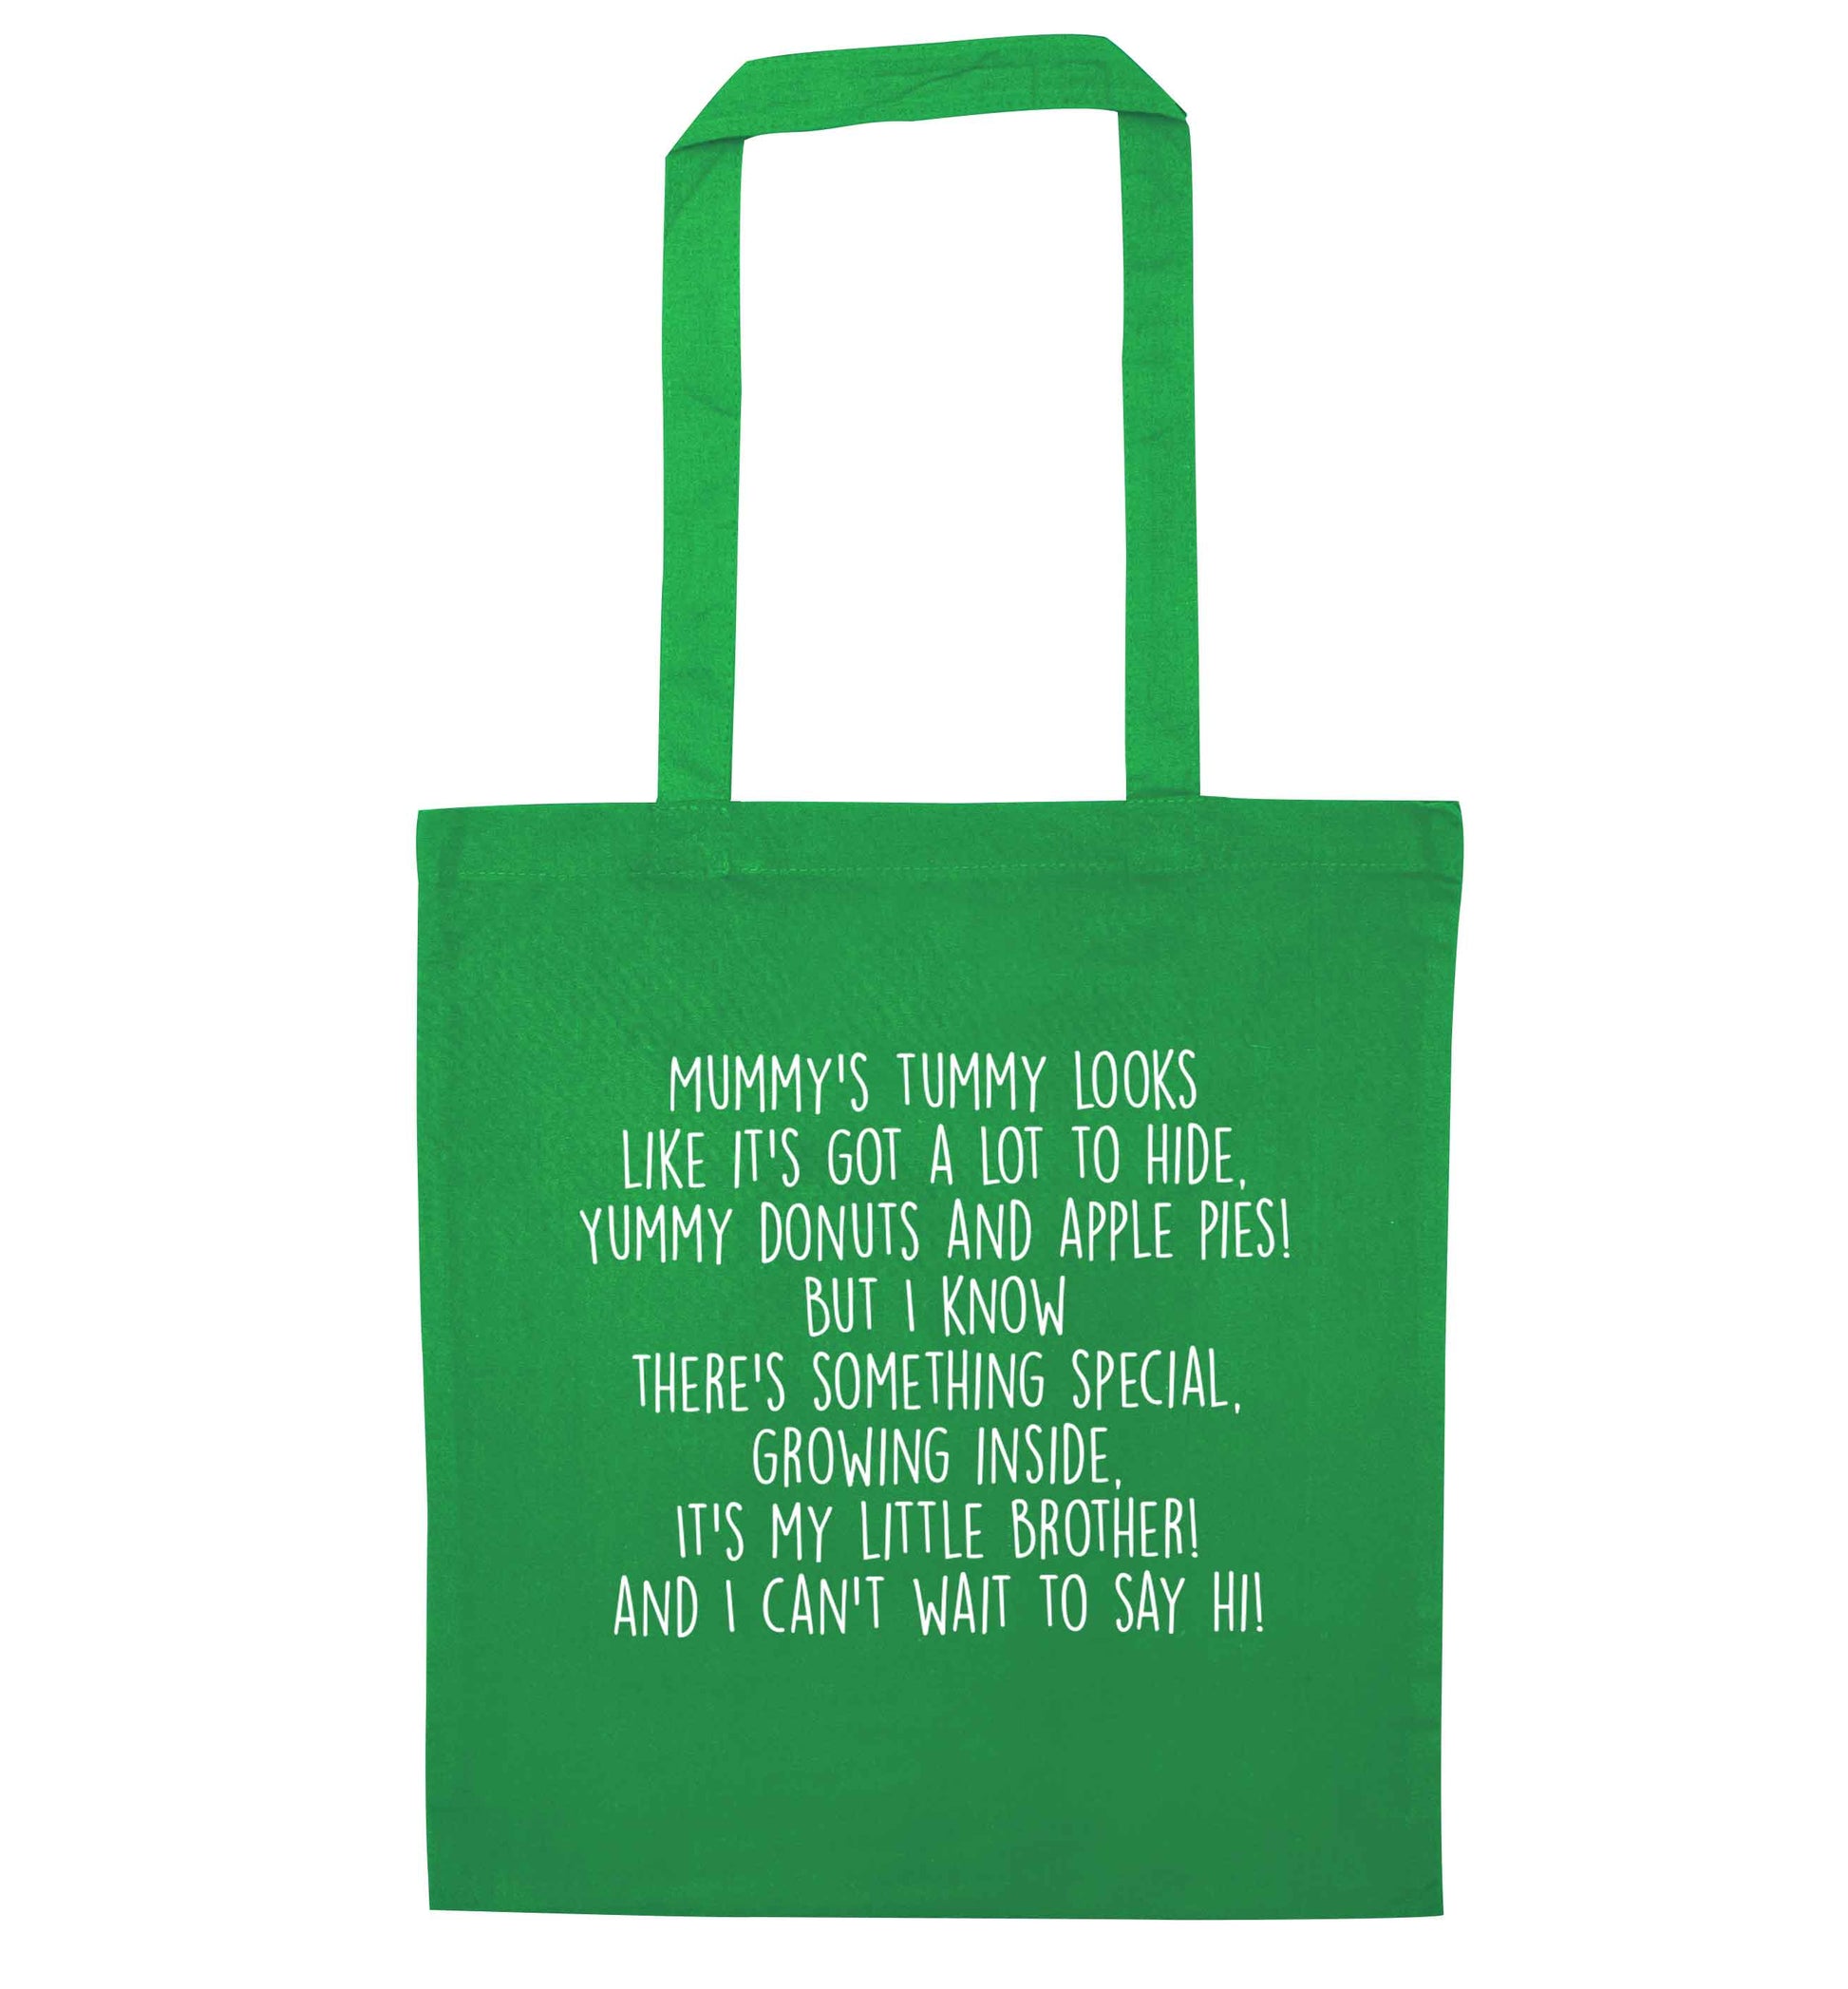 Something special growing inside it's my little brother I can't wait to say hi! green tote bag